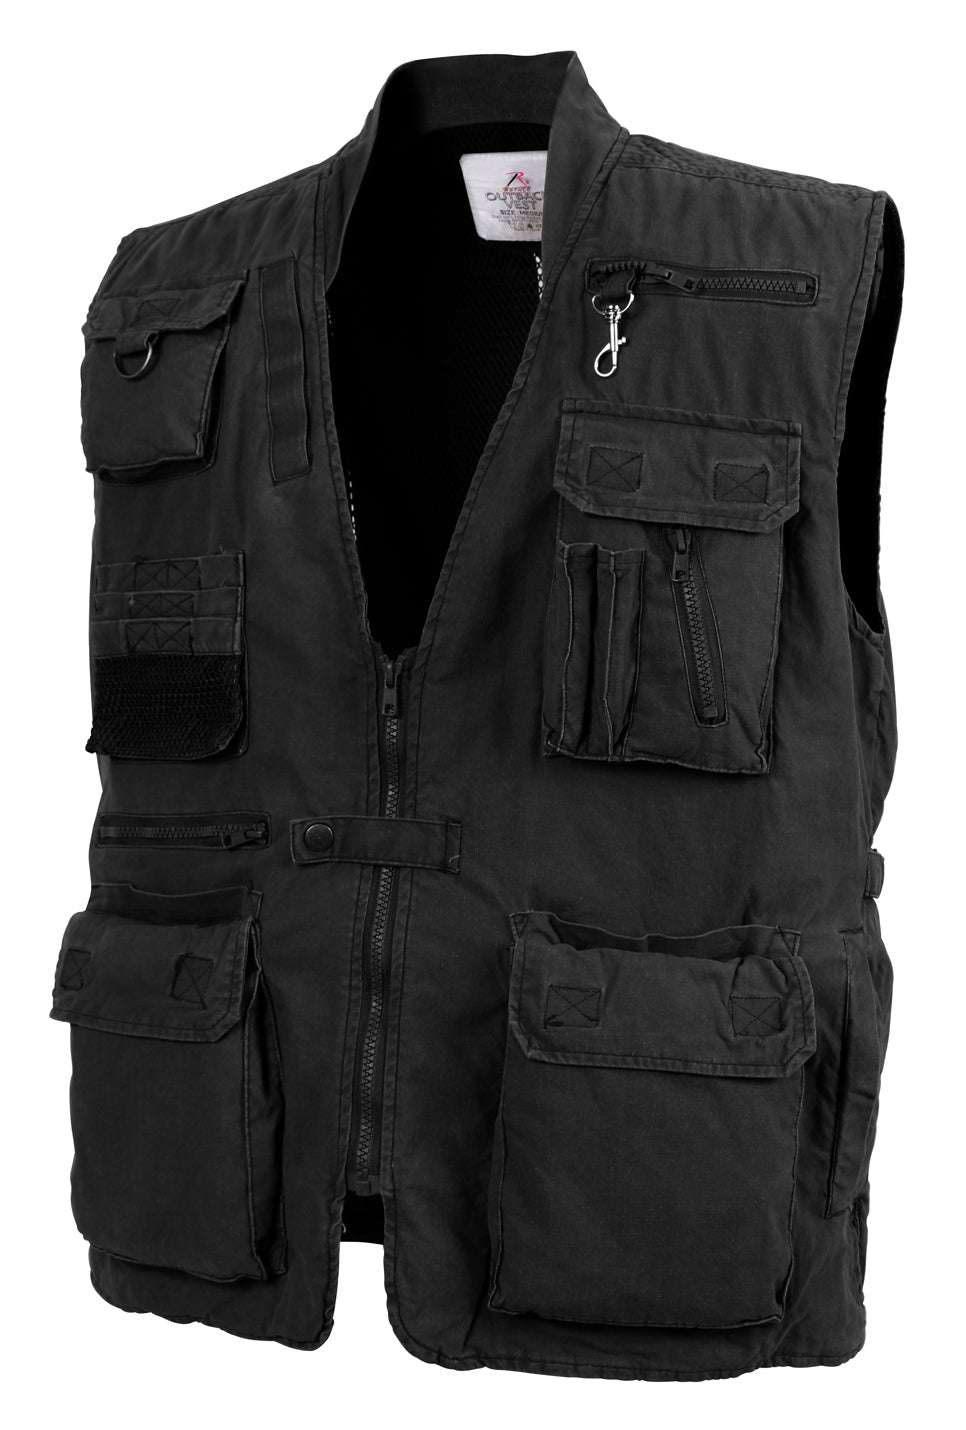 Rothco Deluxe Safari Outback Vest - Tactical Choice Plus